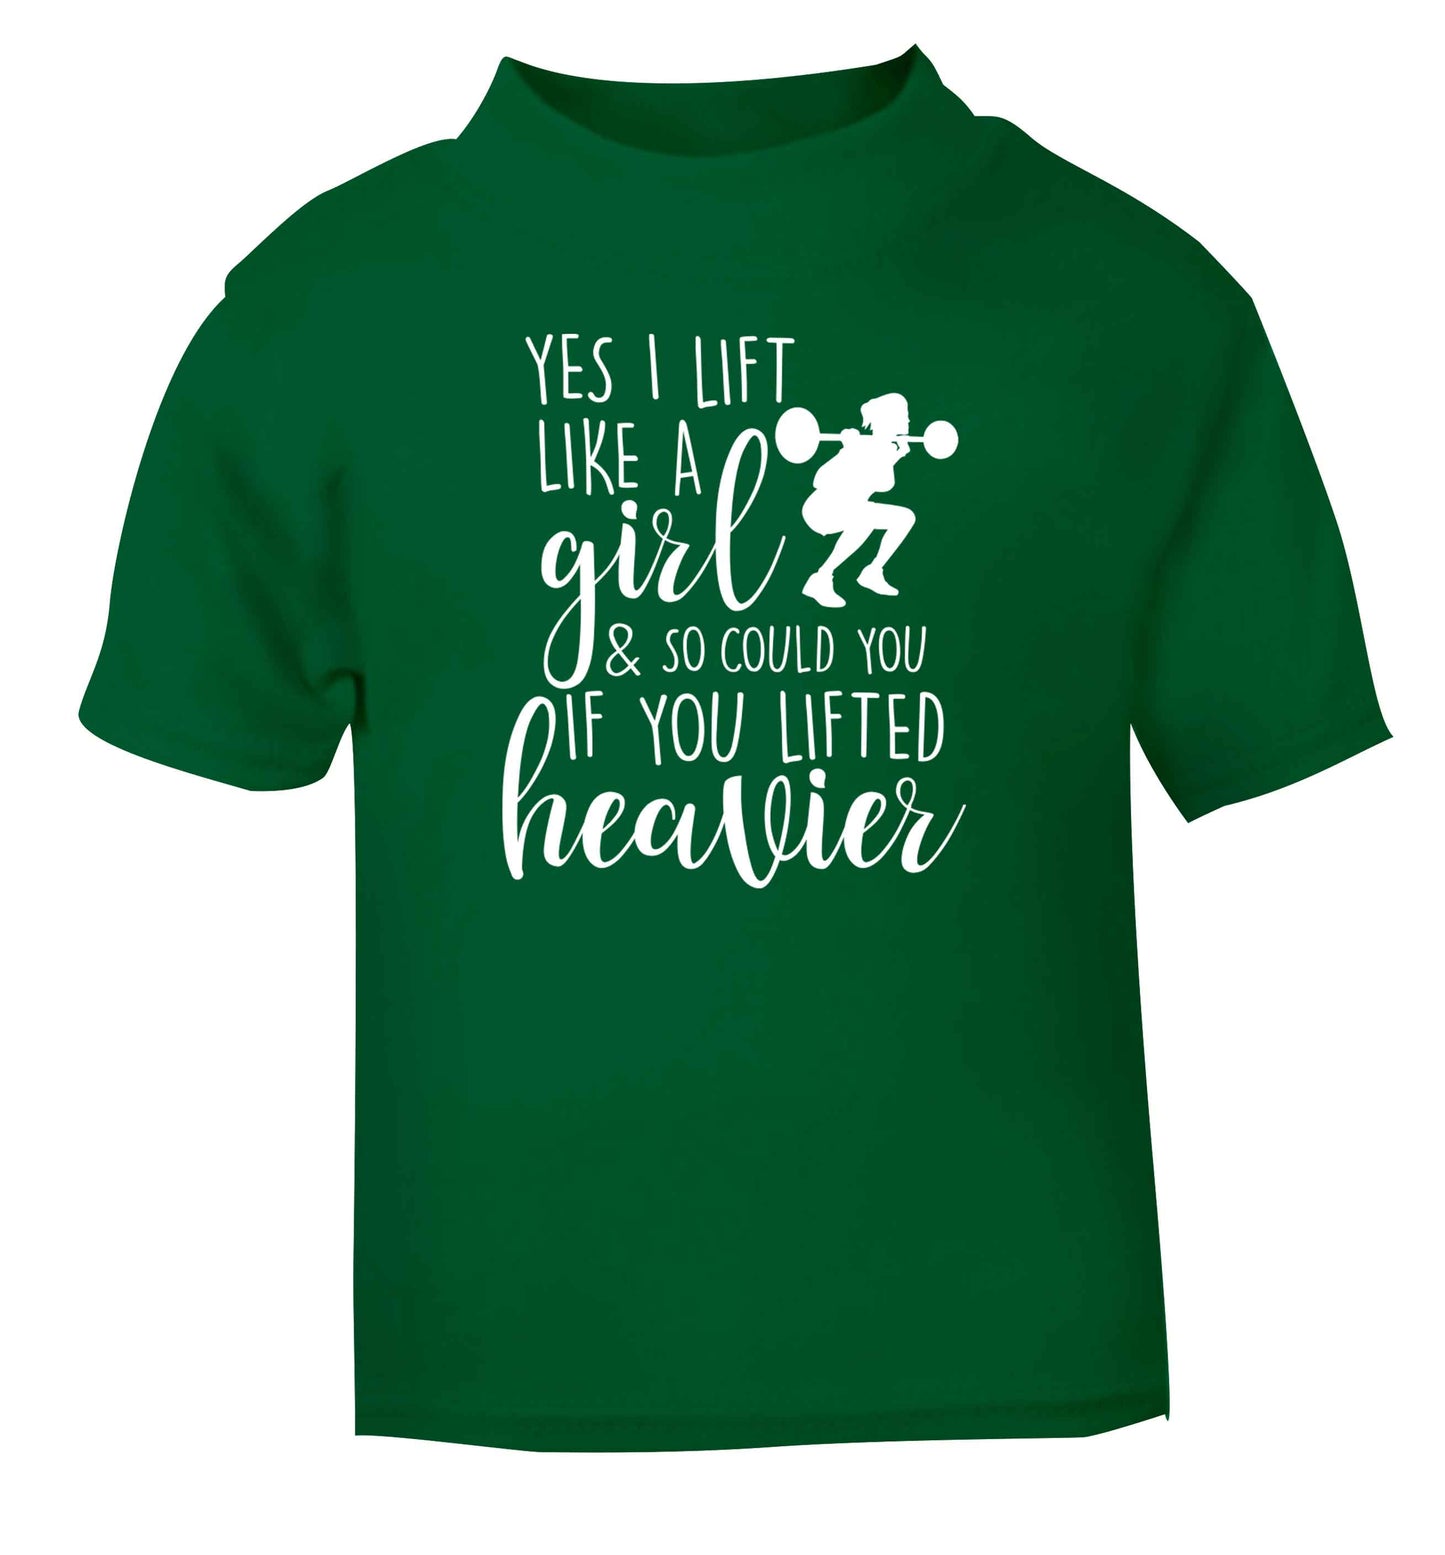 Yes I lift like a girl and so could you if you lifted heavier green Baby Toddler Tshirt 2 Years